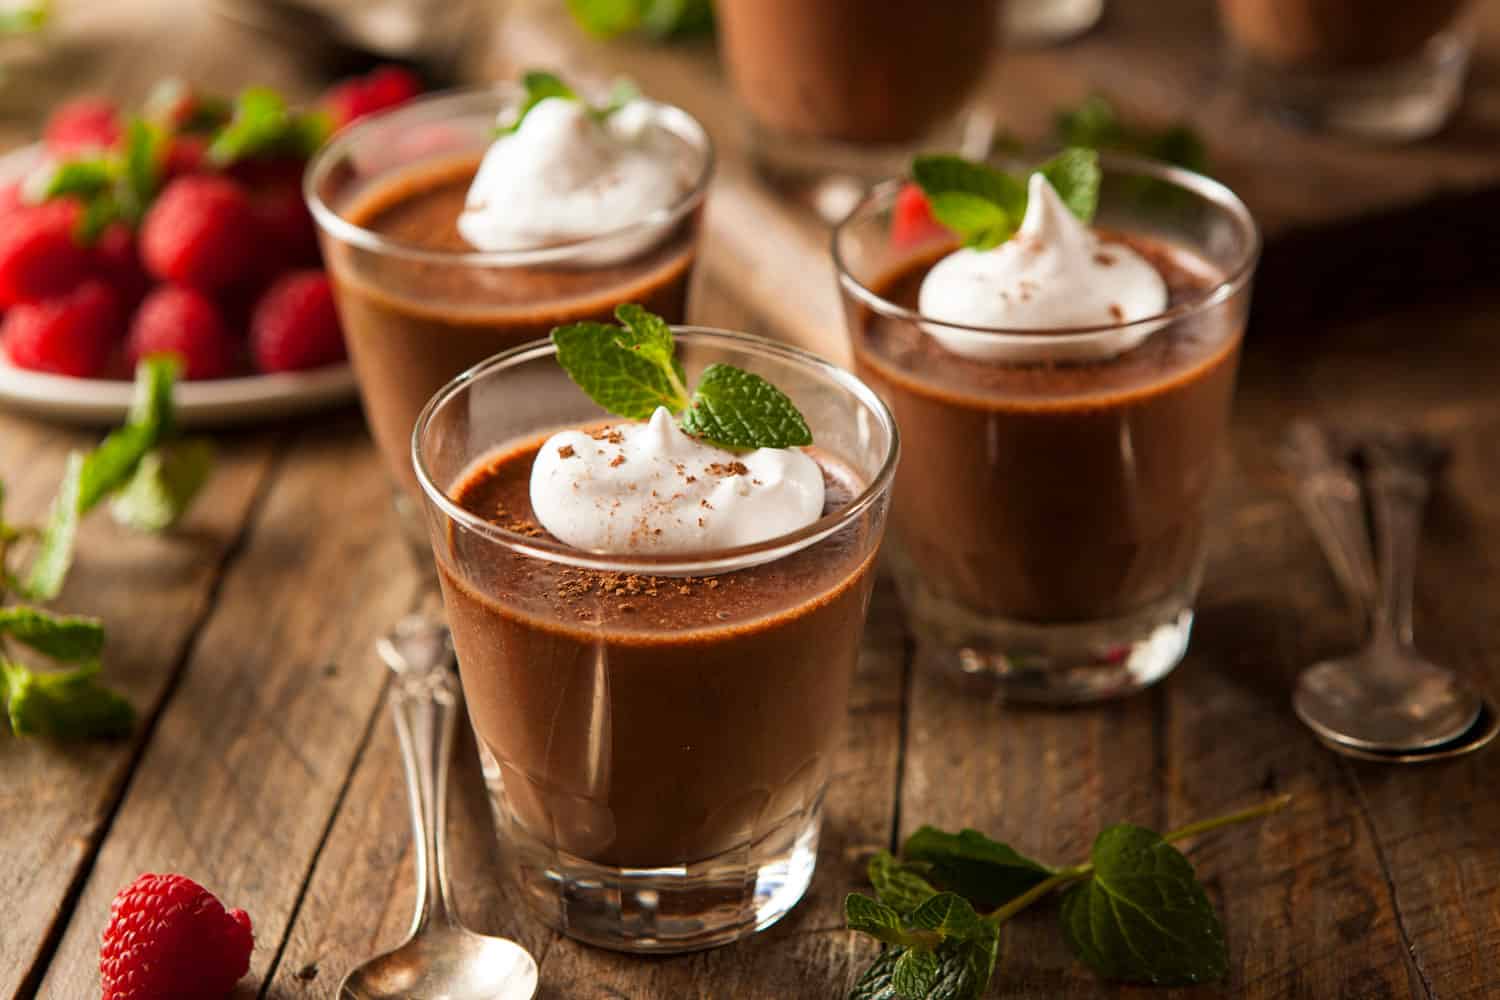 Homemade style of chocolate mousse with whipped cream on top